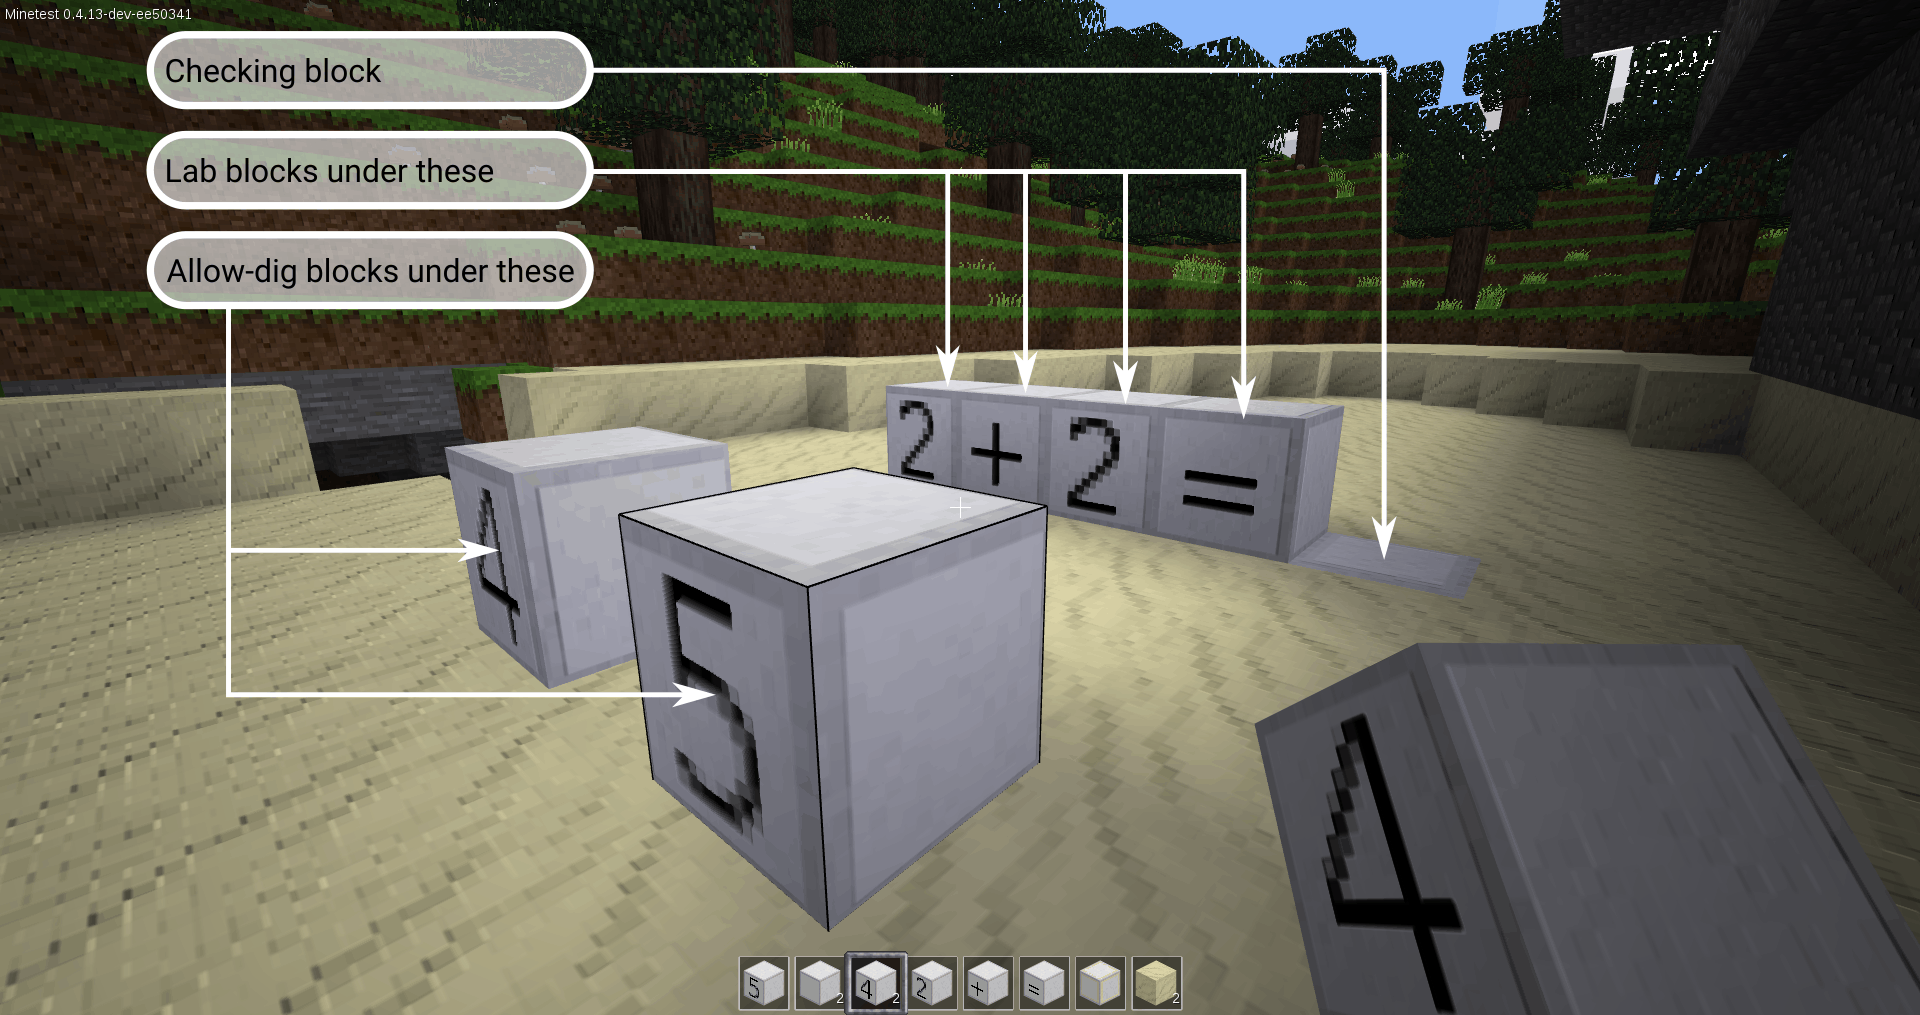 Set up you puzzle on the lab blocks. Put a checking block on the left, and set the blocks with possible answers on allow-dig blocks.